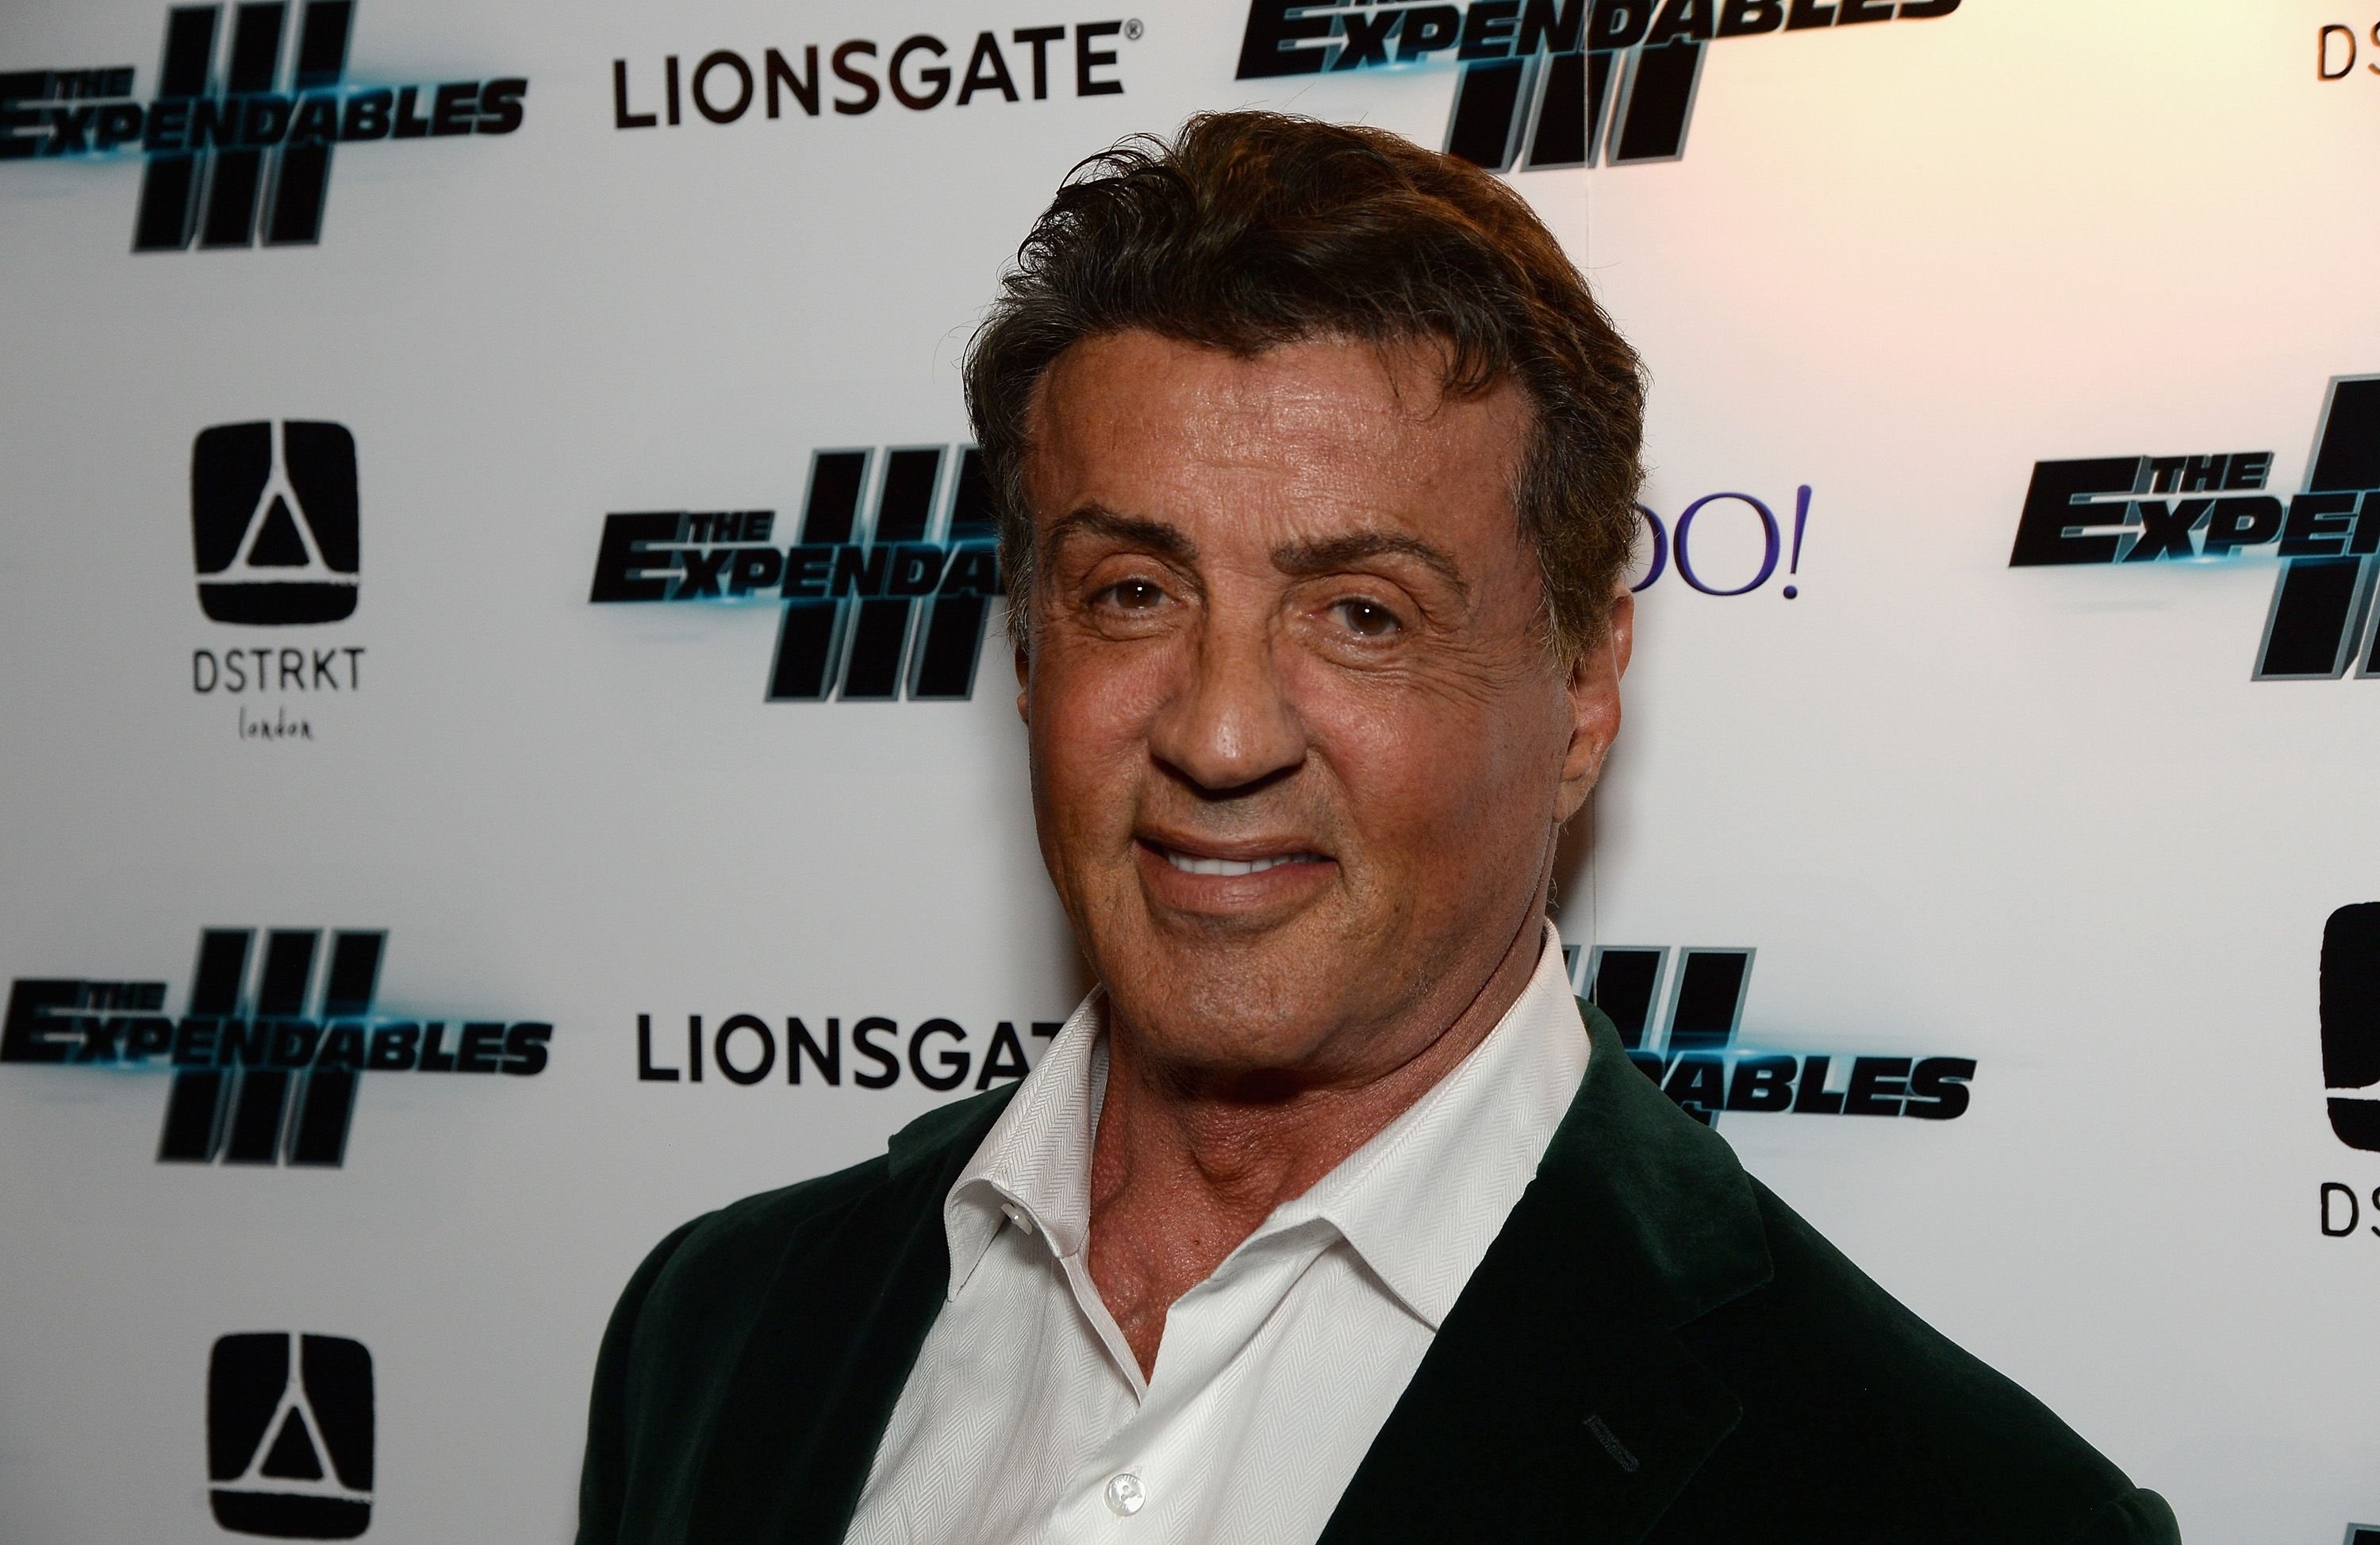 Sylvester Stallone bei der Afterparty "The Expendables 3" im Dstrkt am 4. August 2014 in London, England | Quelle: Getty Images